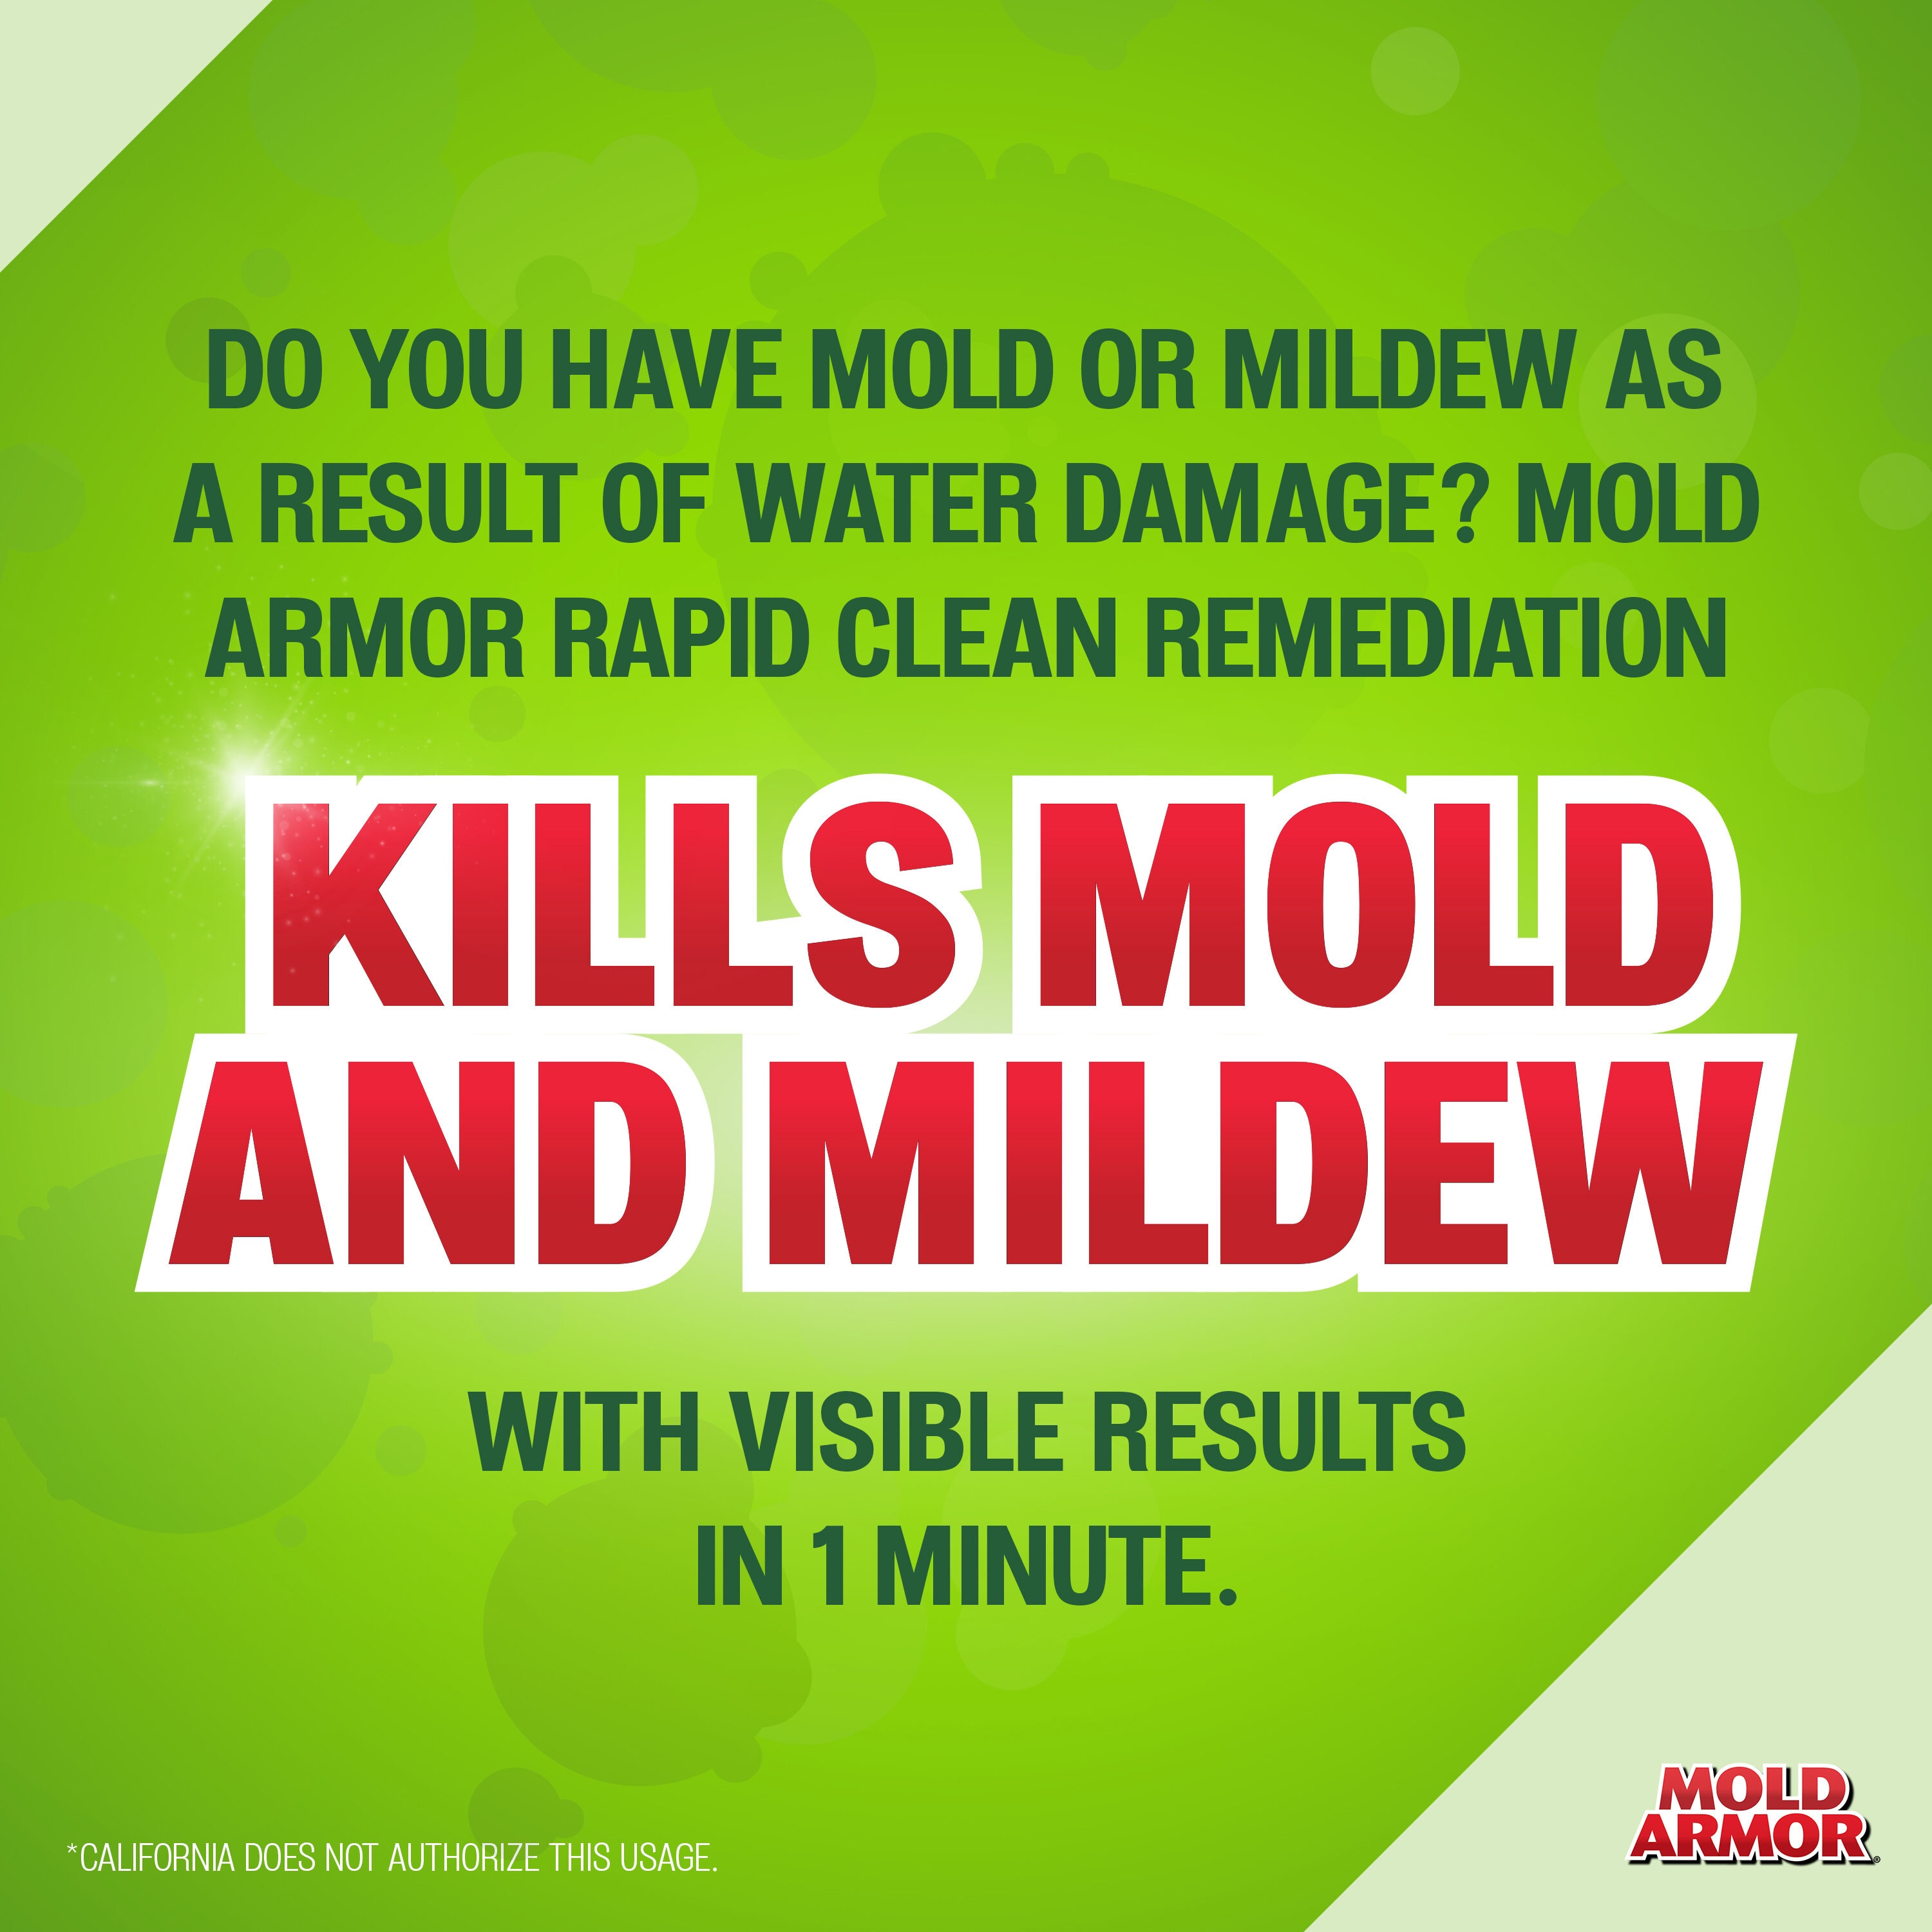 MOLD ARMOR, Trigger Spray Bottle, 32 oz Container Size, Mold and Mildew  Remover - 6XFG7